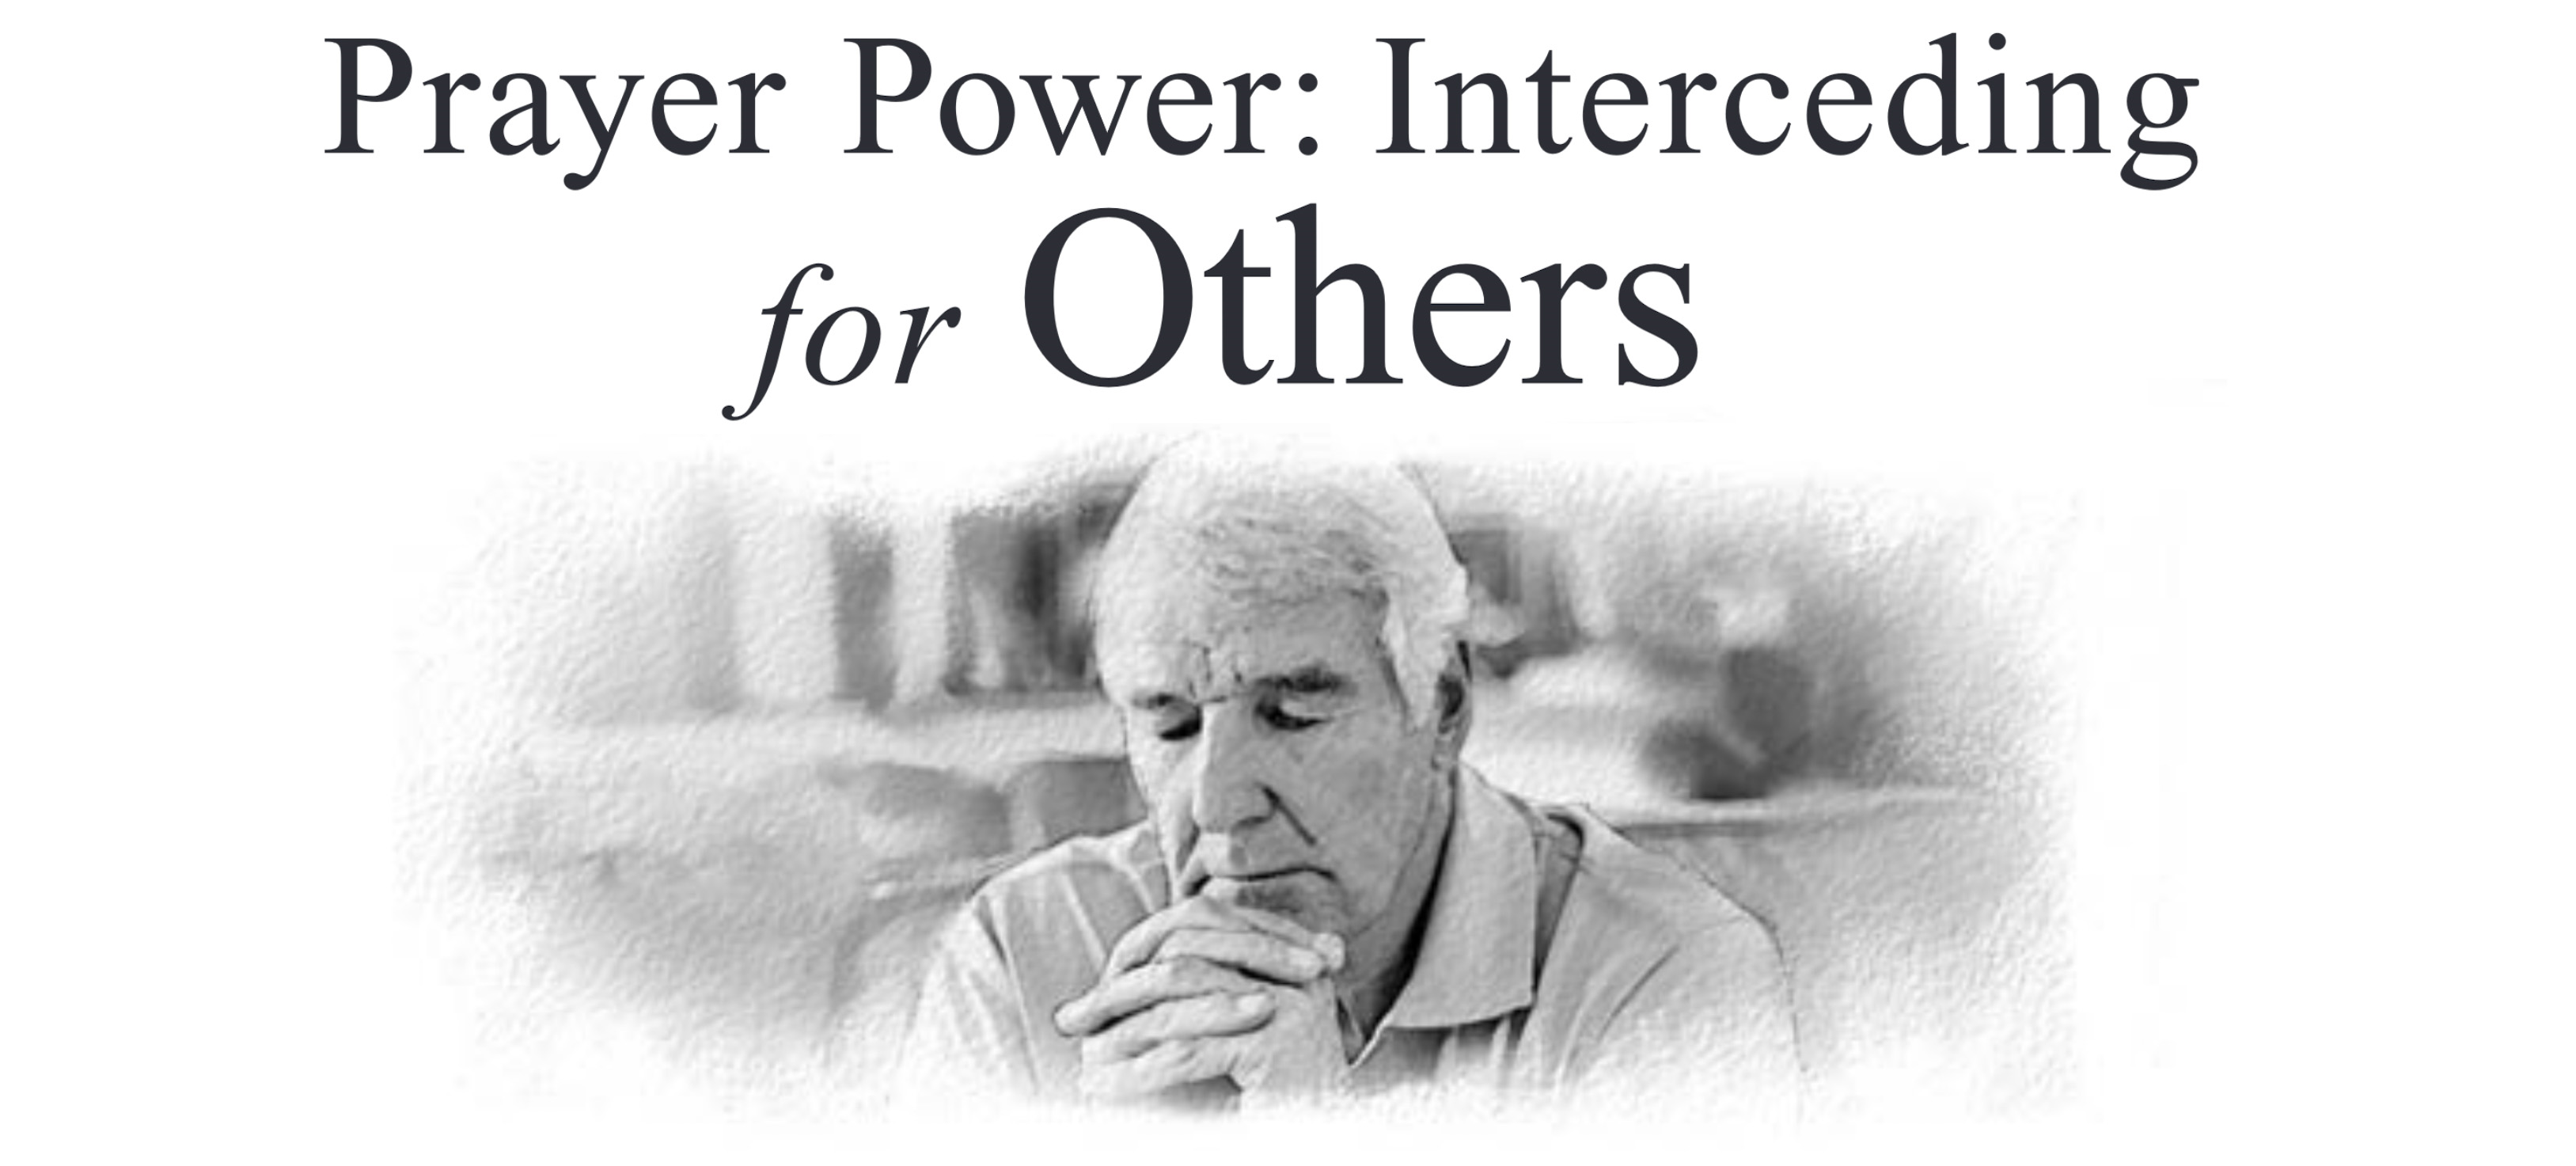 Lesson 4: Prayer Power: Interceding for Others (3rd Quarter 2020) - Sabbath School Weekly Lesson. Weekly lesson for in-depth Bible study of Word of God.